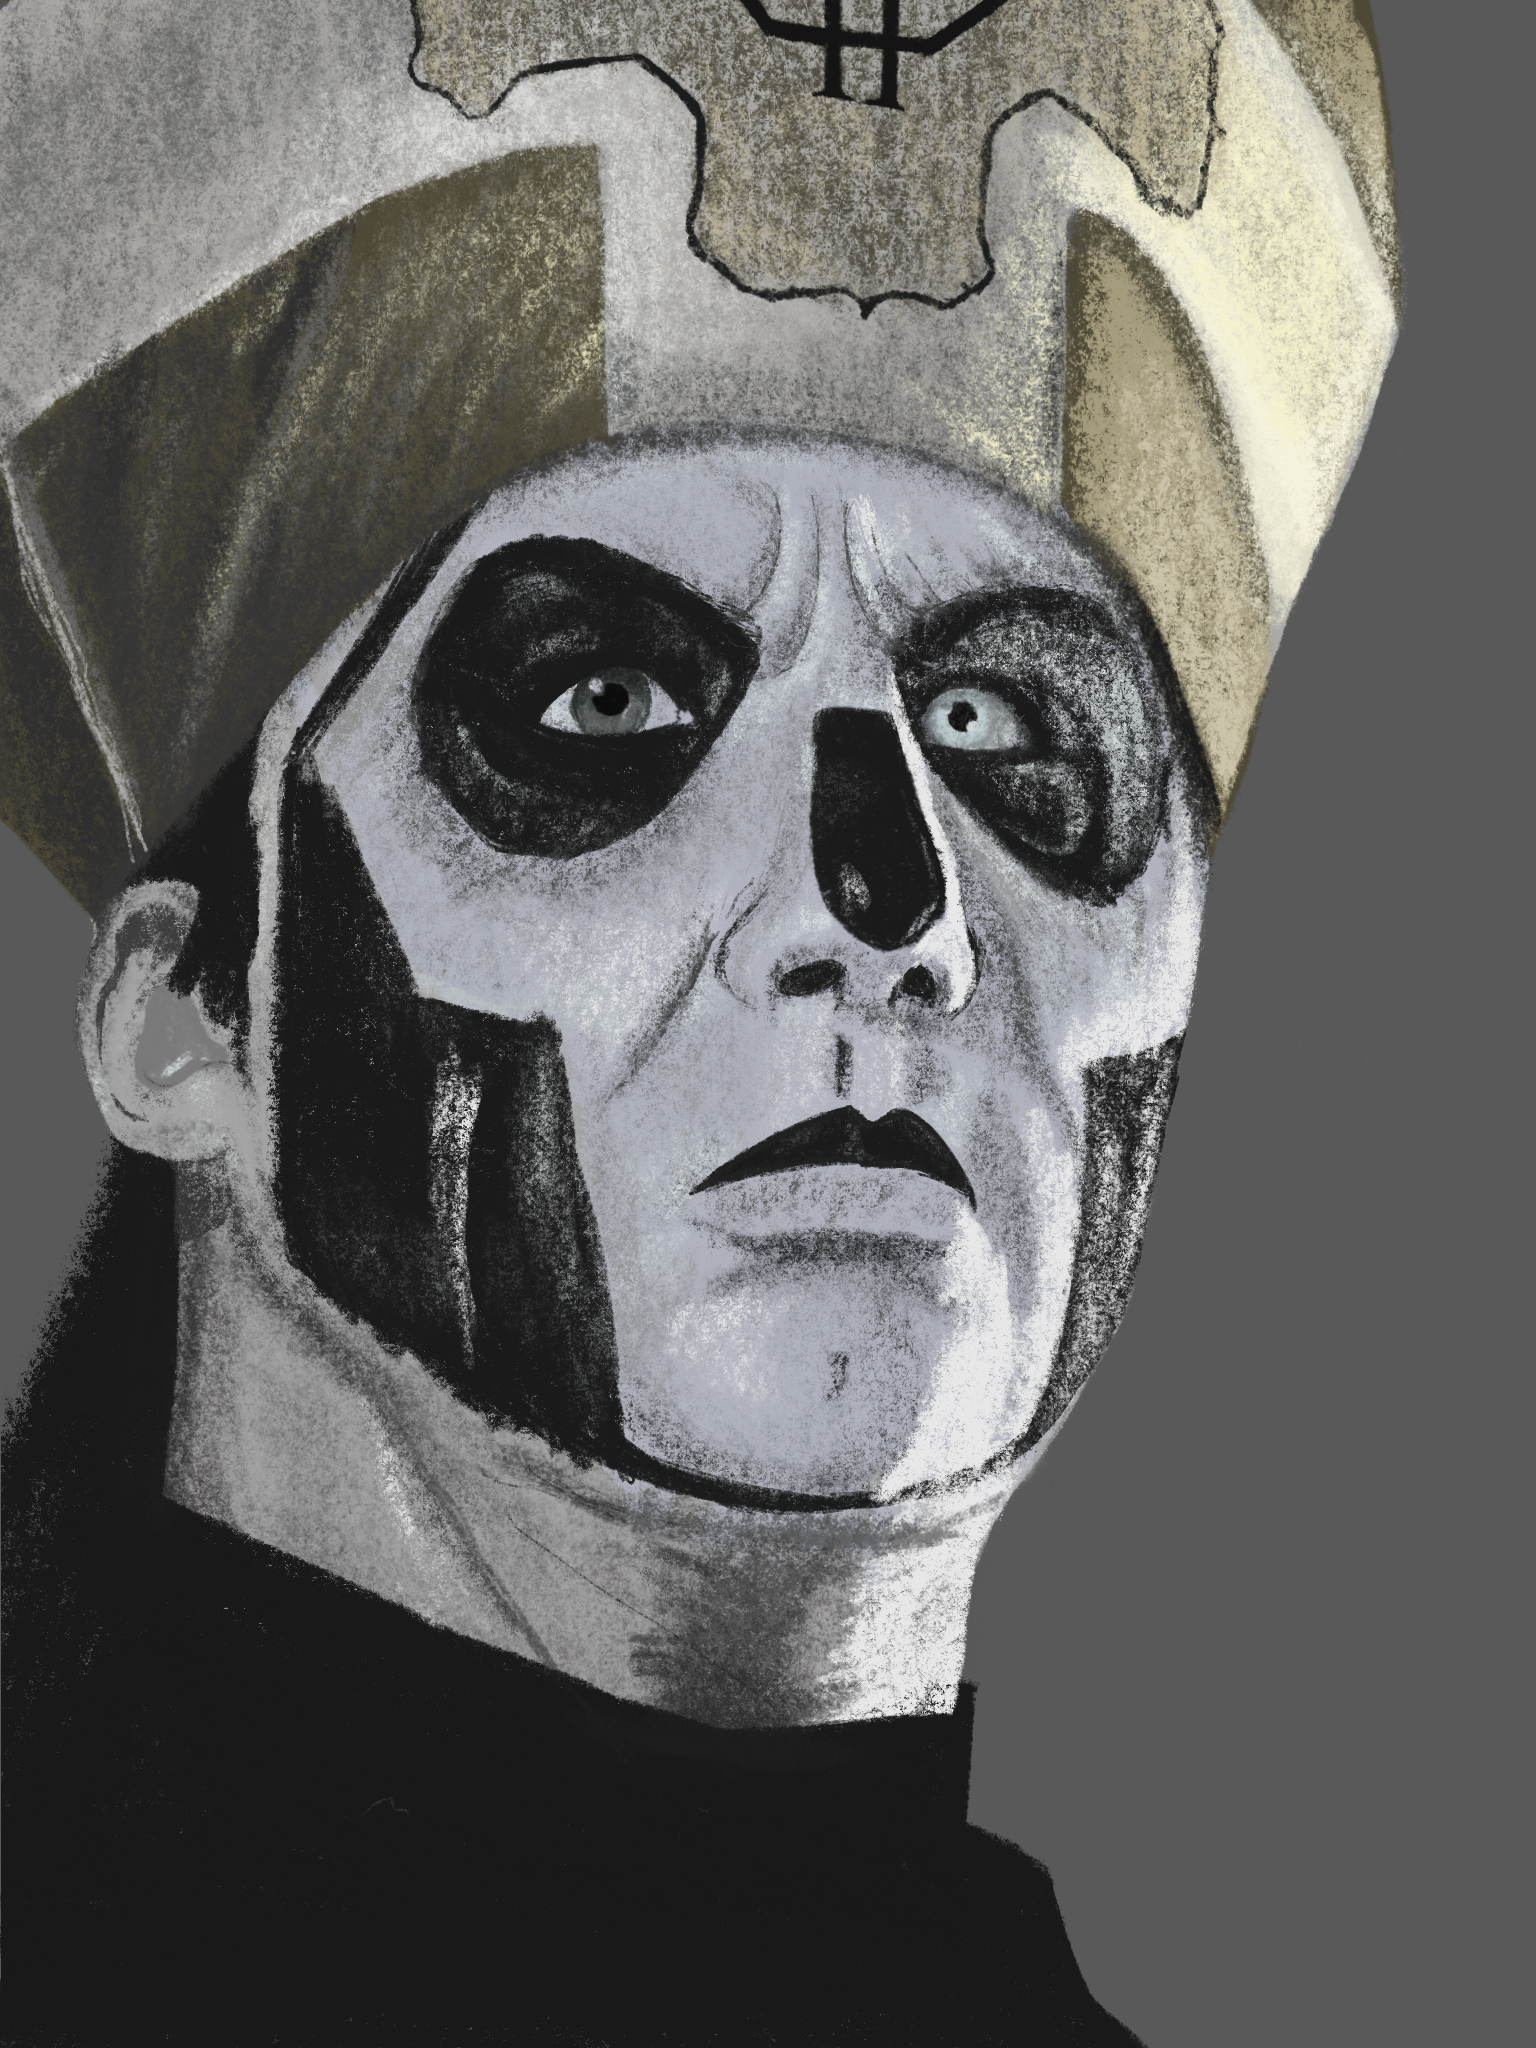 Illustration of Papa Emeritus the Third of the band Ghost.